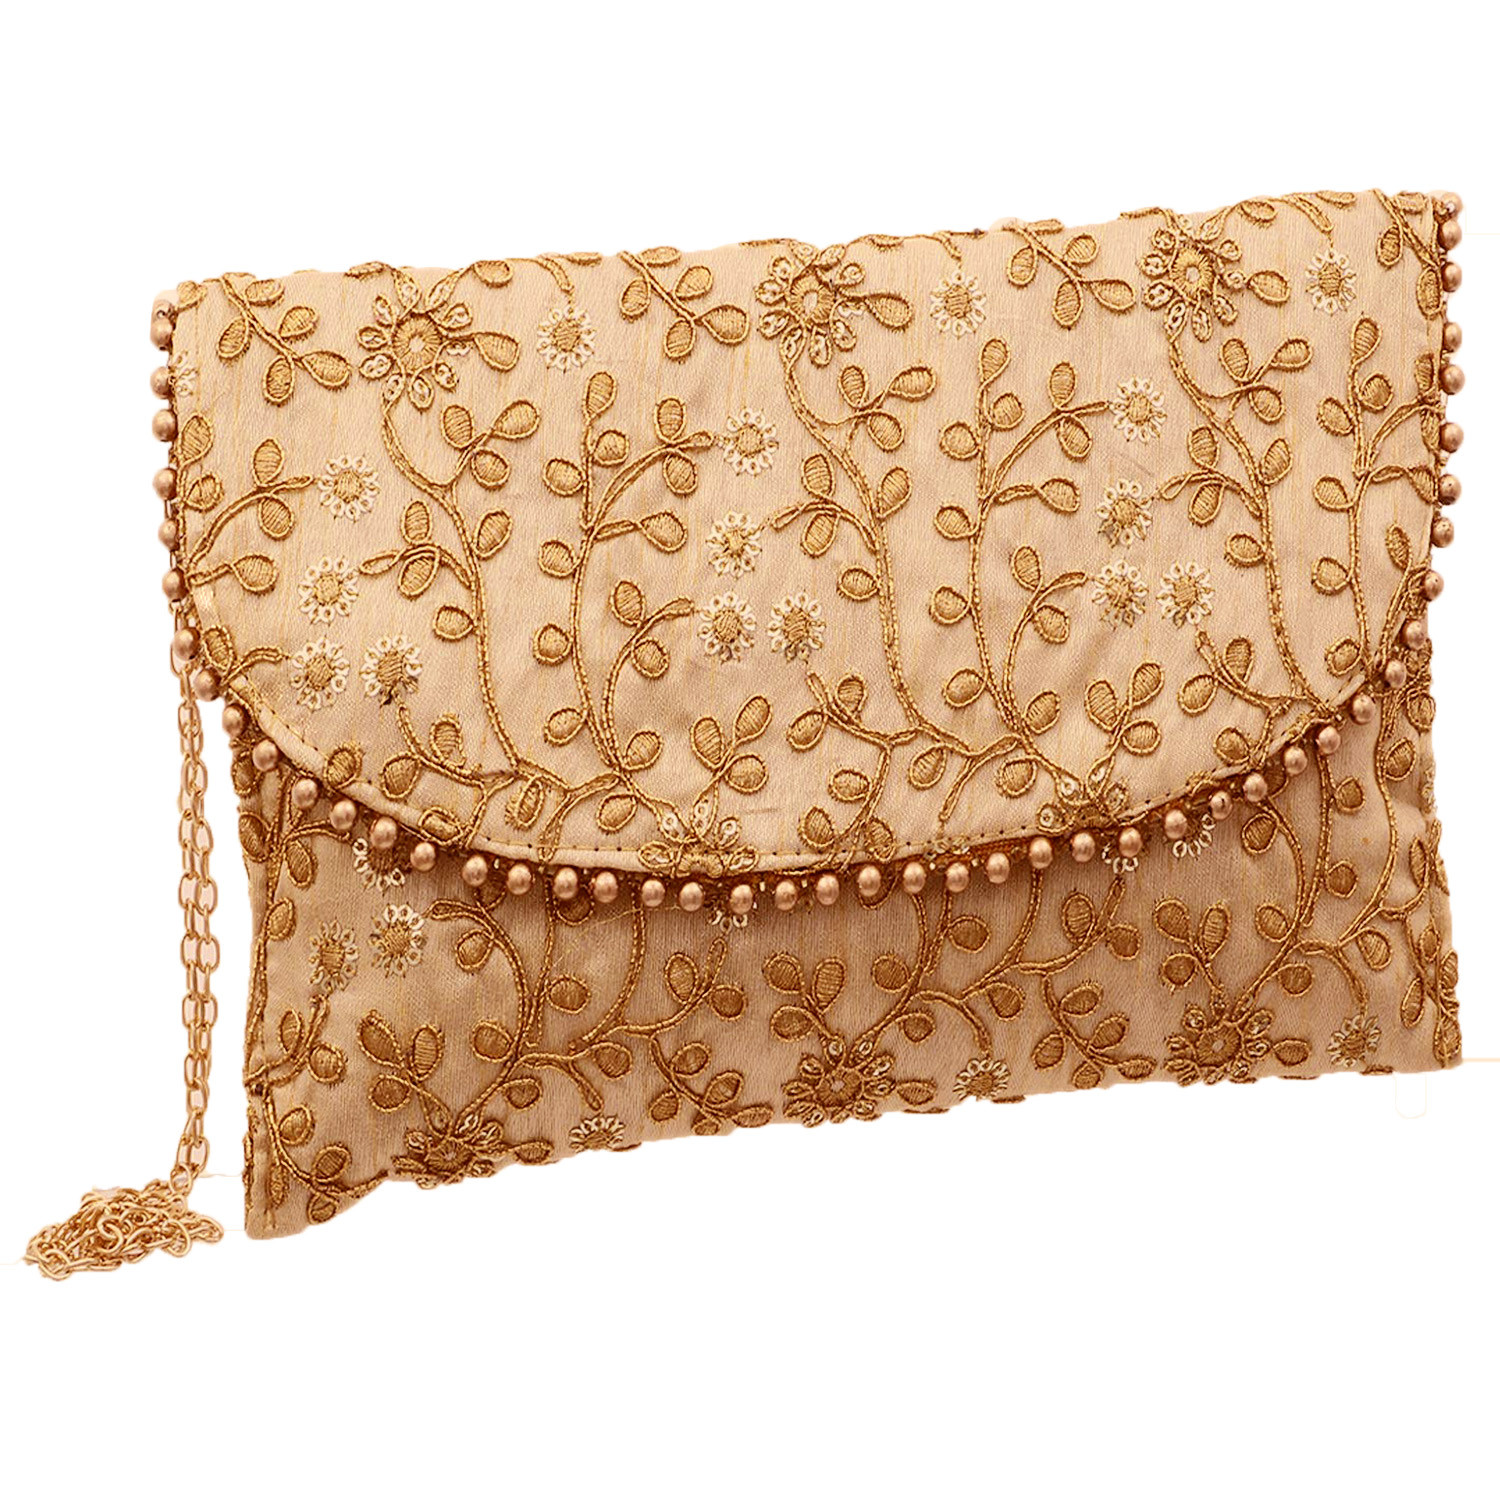 Kuber Industries Embroidery Golden Pearl Border Clutch|Hand Purse & Pearls Handle With Magnetic Lock For Woman,Girls (Peach)